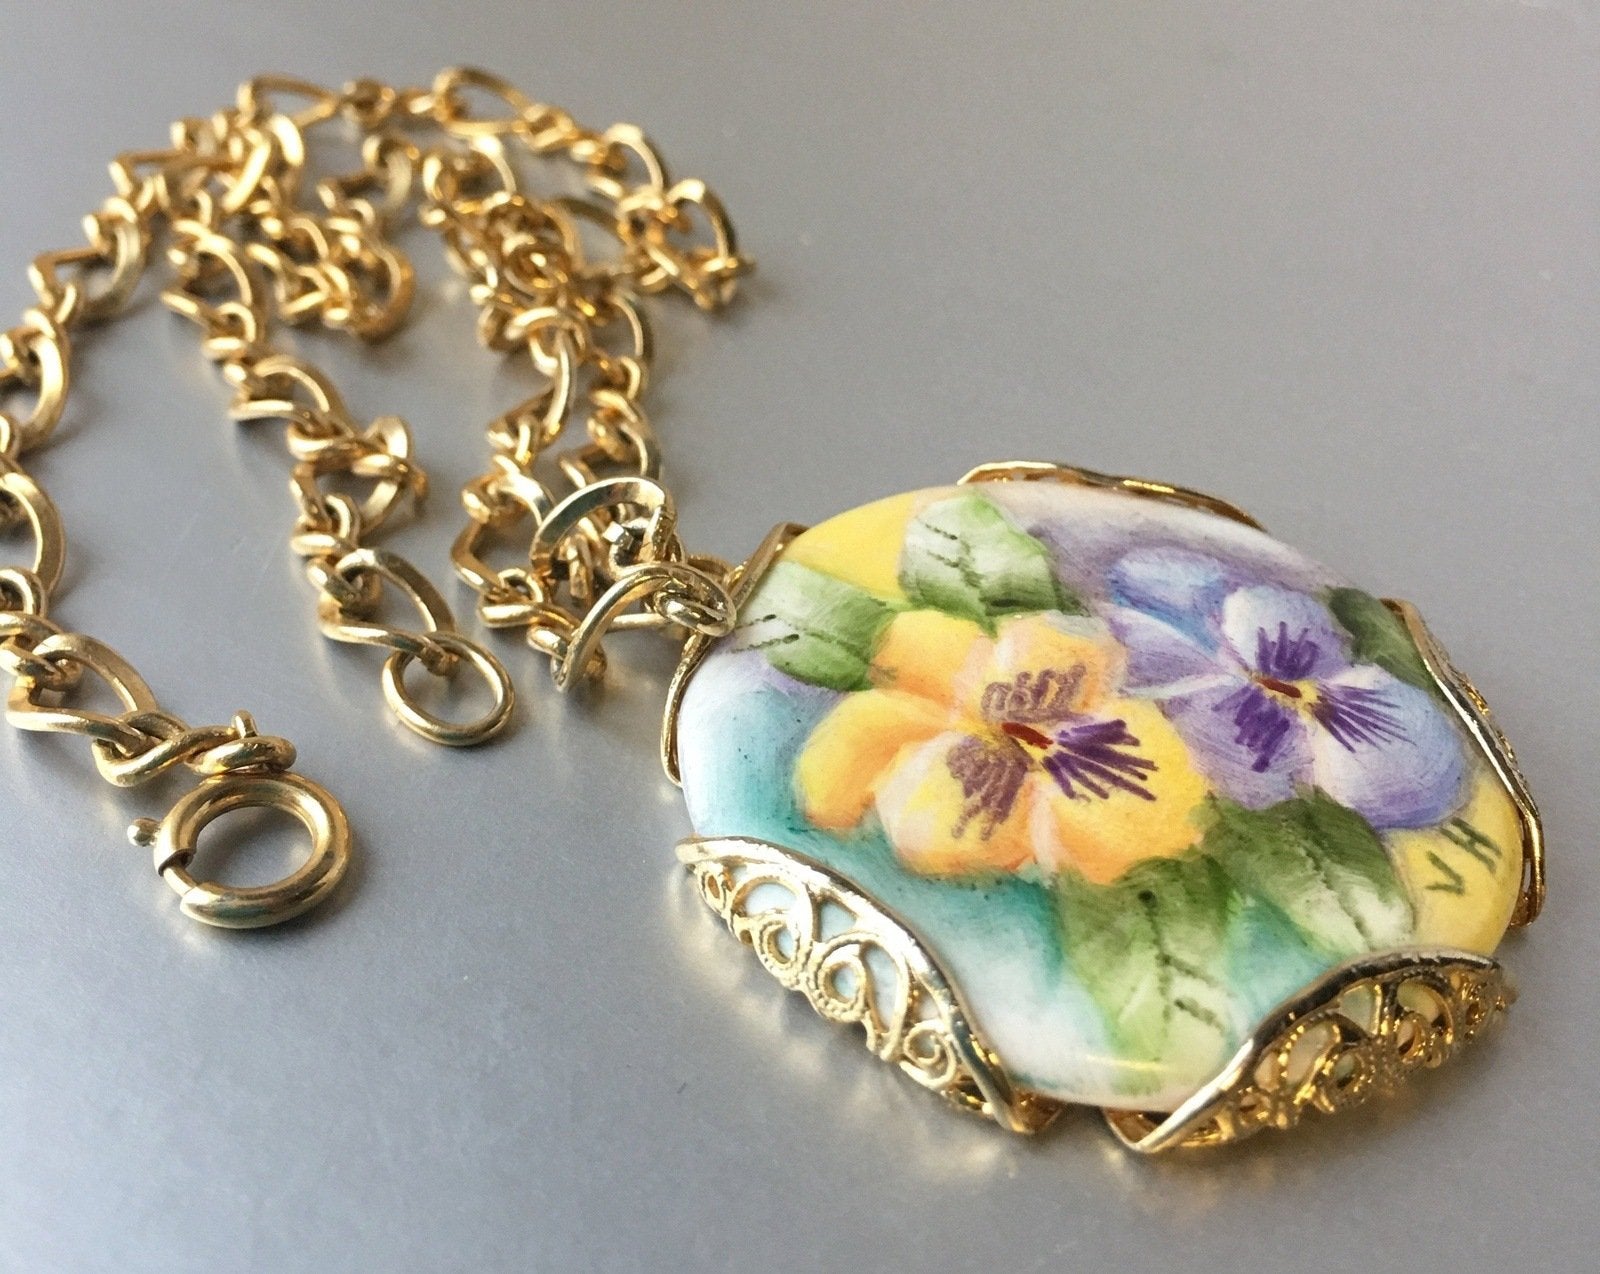 Handmade Floral Ceramic Pendant Golden Chain Link Necklace Vintage Jewelry